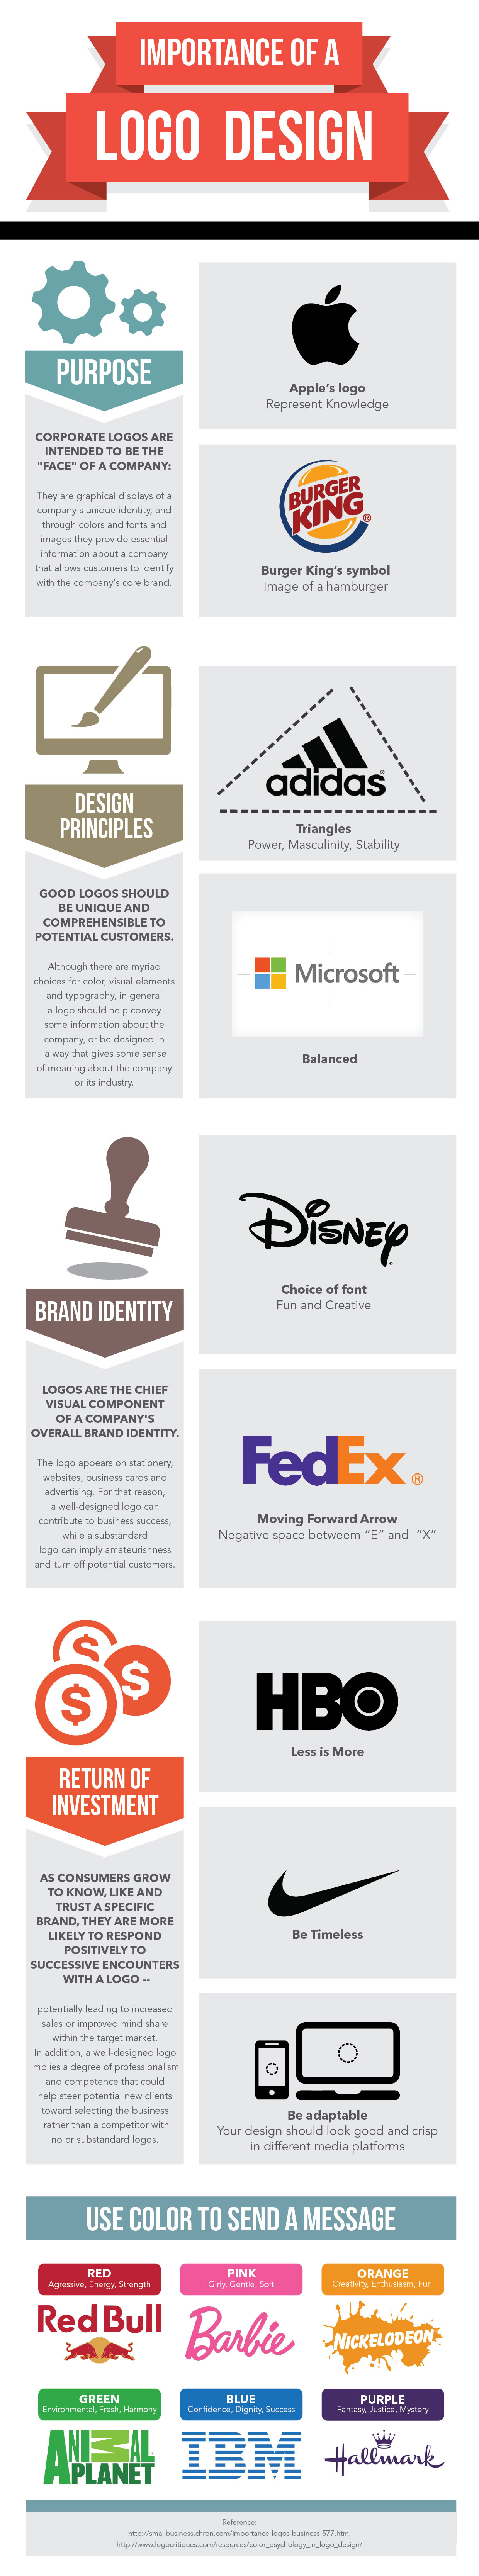 Importance of a Logo Design Infographic